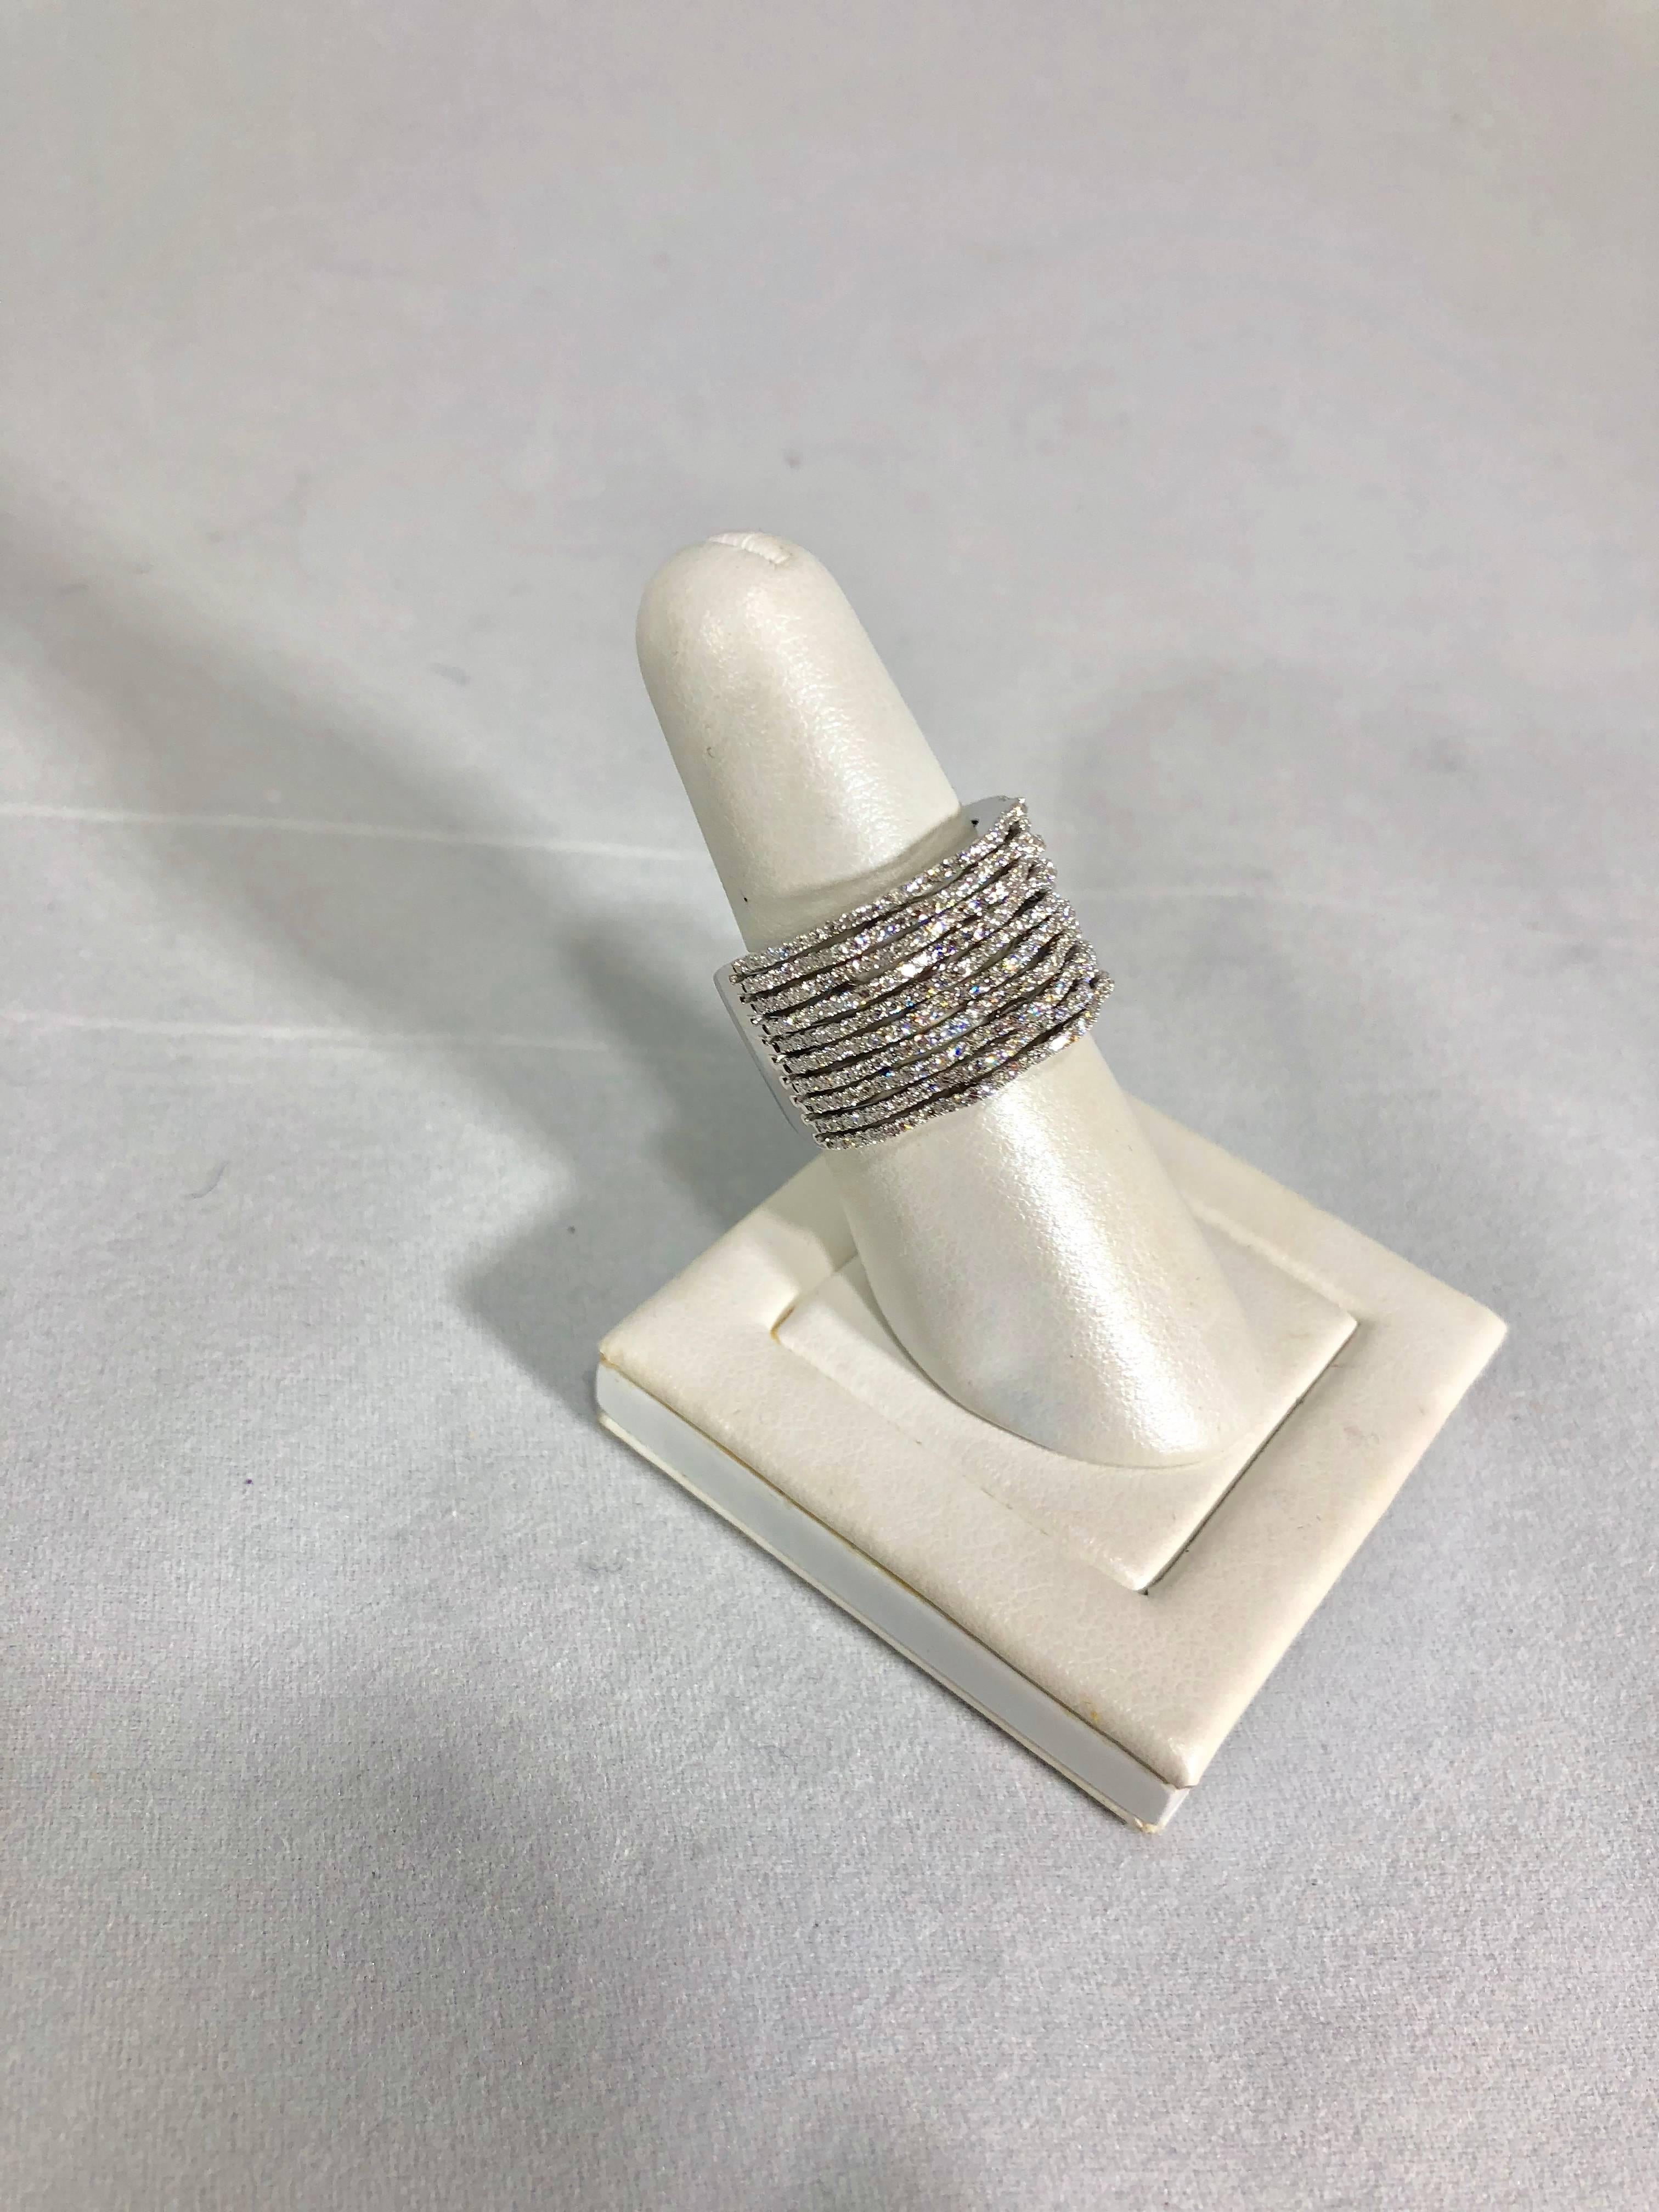 Elma Designs 18 Karat White Gold and Diamond Cocktail Fashion Ring In New Condition For Sale In Mansfield, OH